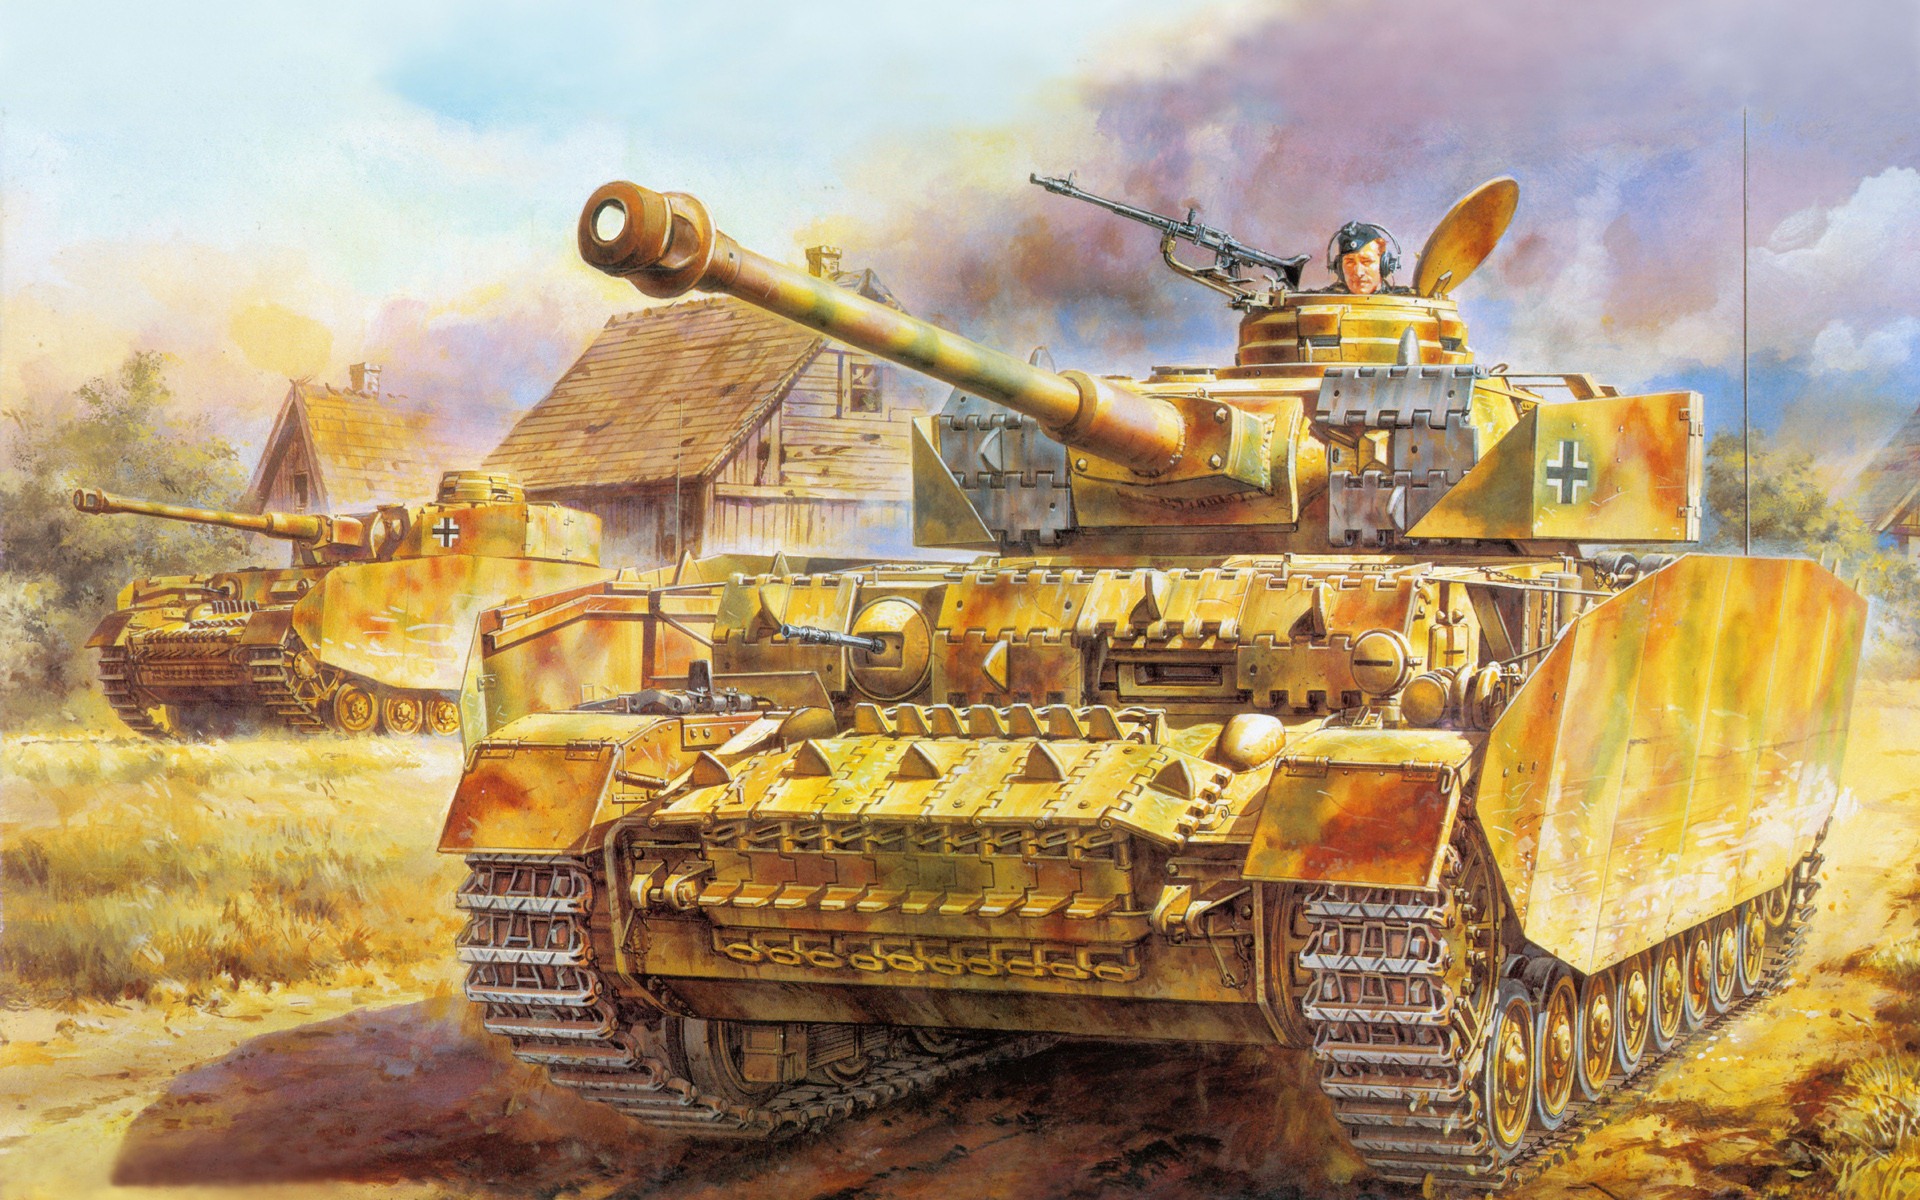 Military tanks, armored HD painting wallpapers #13 - 1920x1200